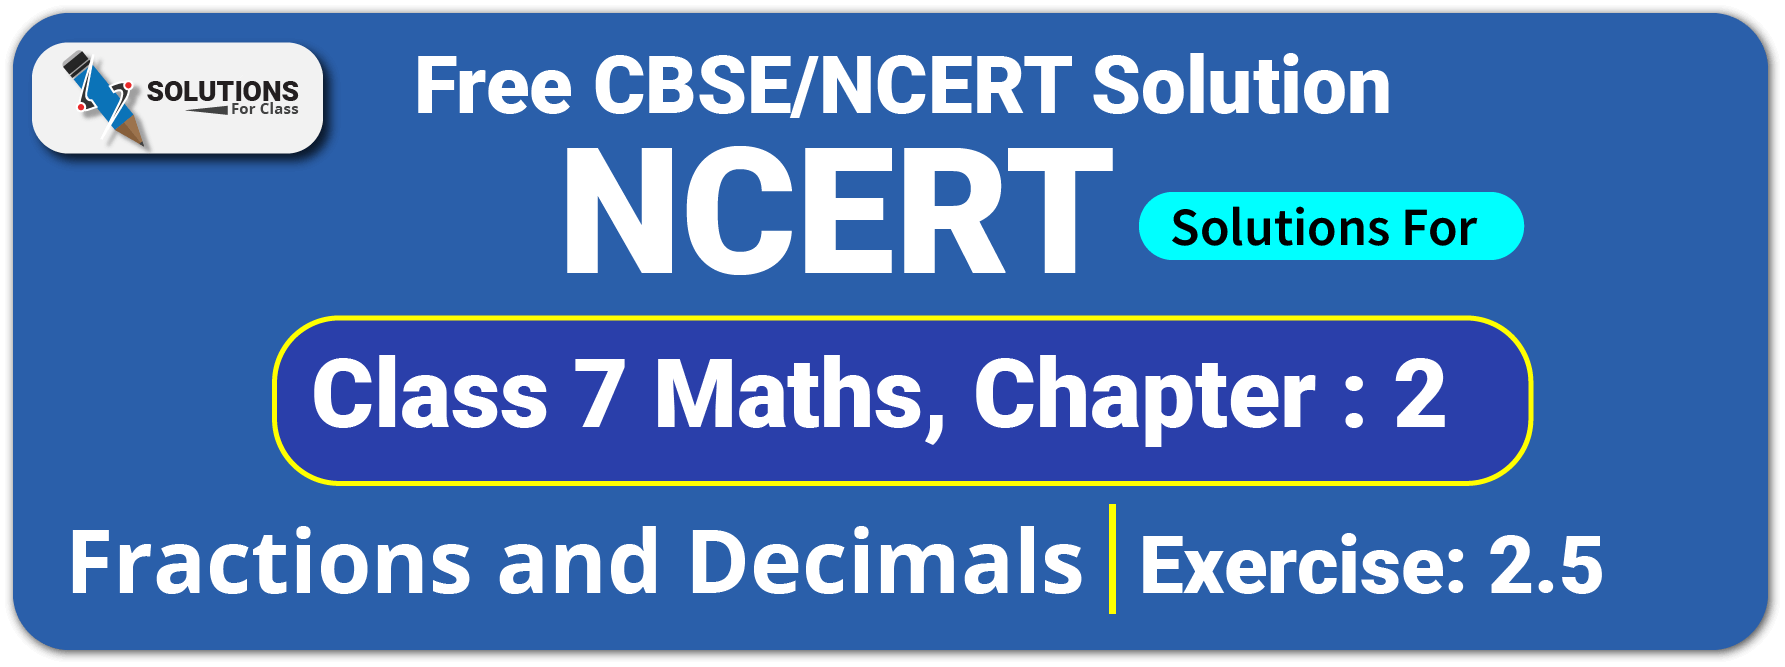 NCERT Solutions For Class 7 Chapter 2, Fractions and Decimals, Exercise 2.5